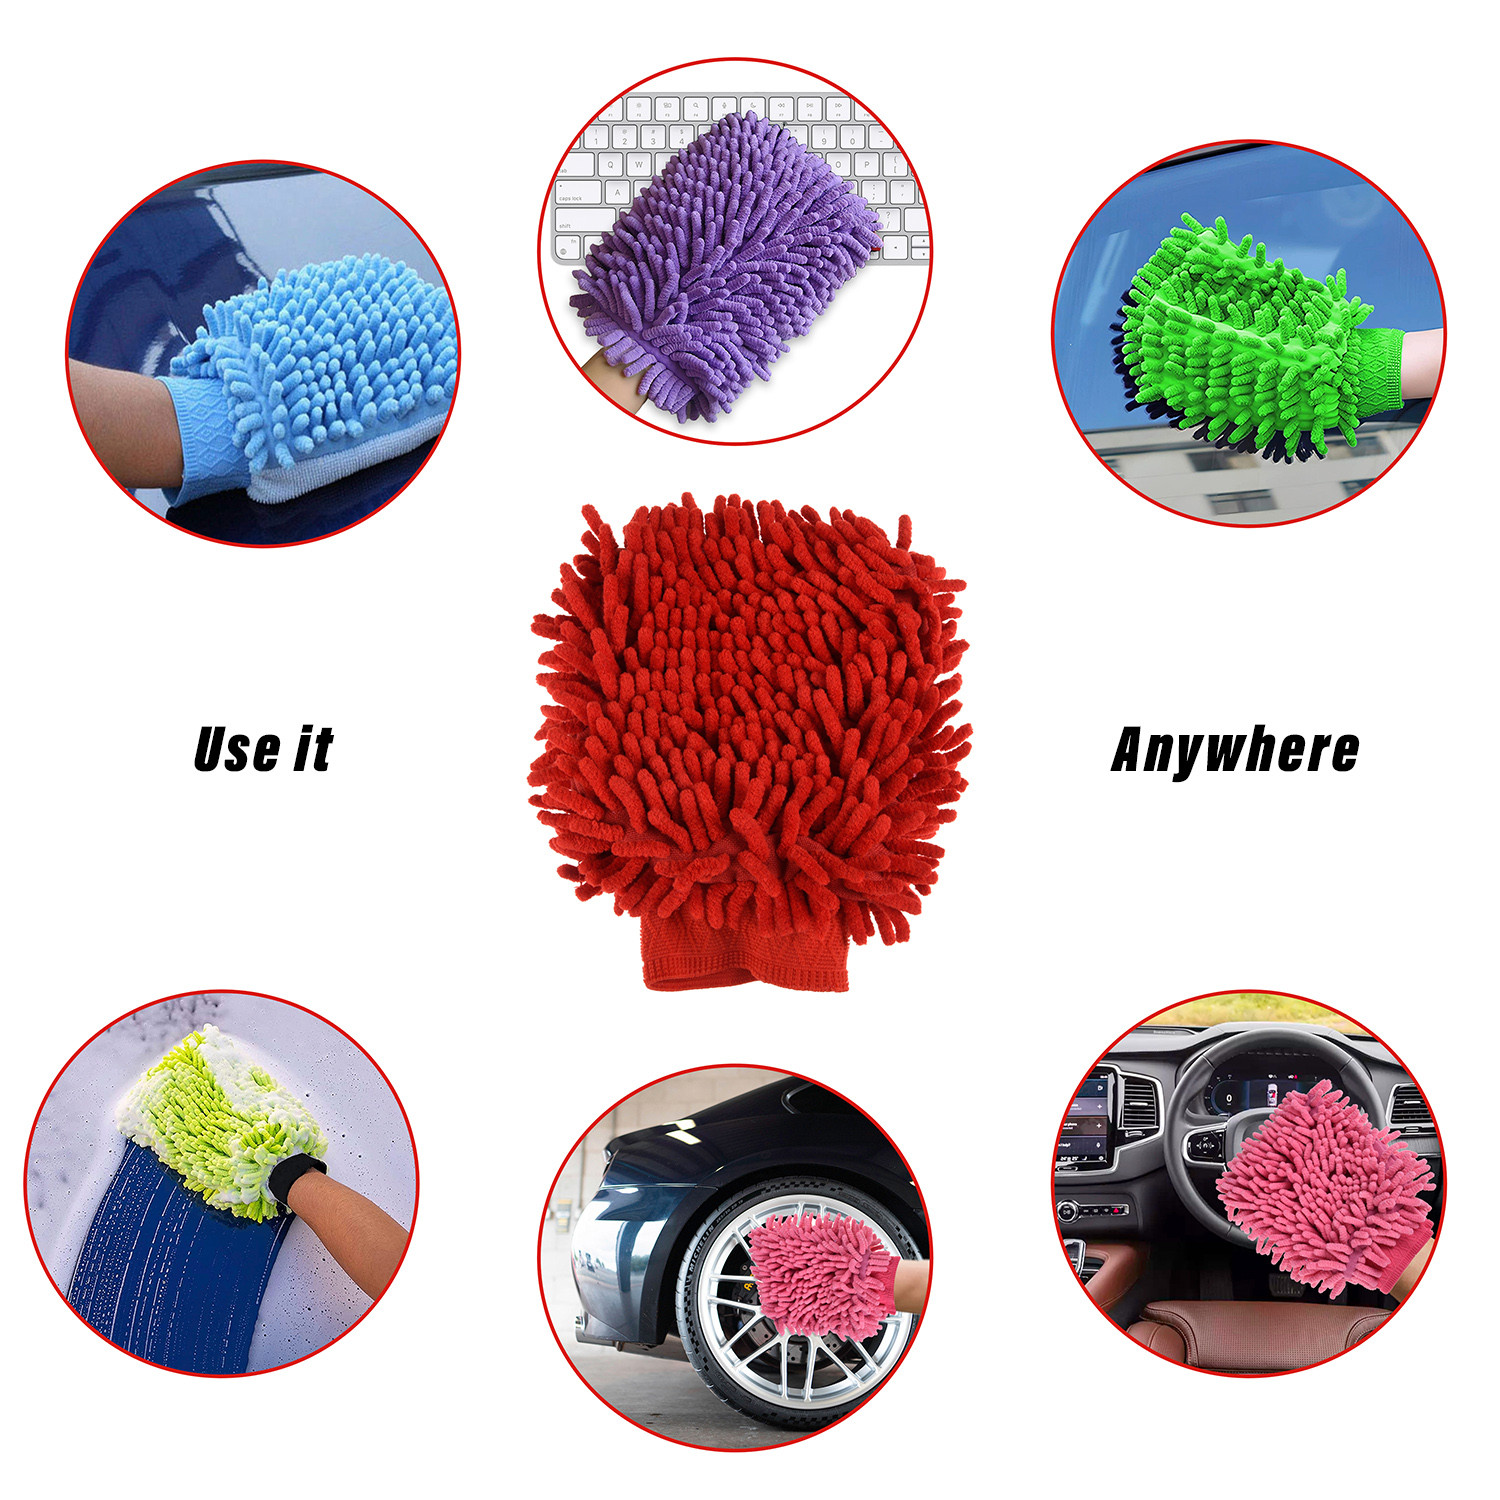 Kuber Industries Chenille Mitts|Microfiber Cleaning Gloves|Inside Waterproof Cloth Gloves|100 Gram Weighted Hand Duster|Hand Chenille Gloves For Car|Glass (Red)